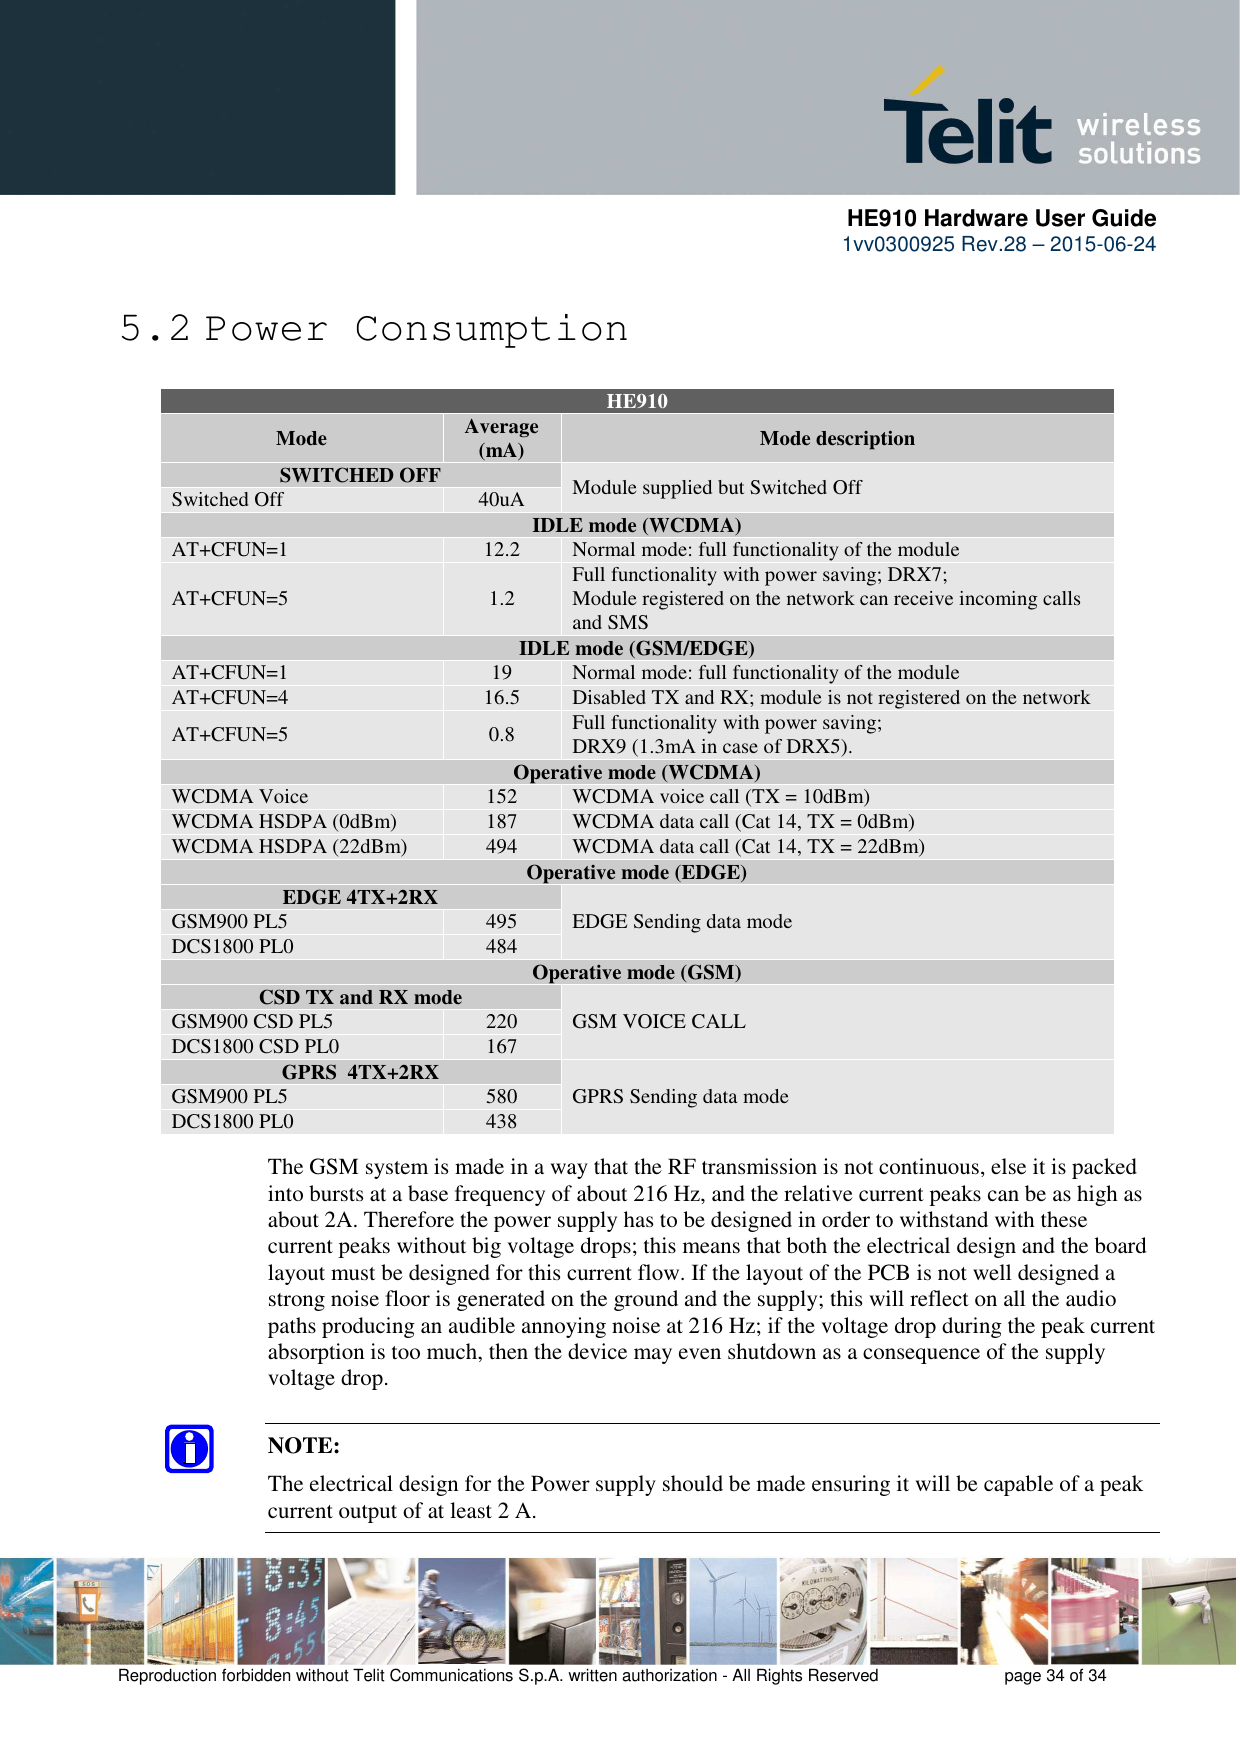      HE910 Hardware User Guide 1vv0300925 Rev.28 – 2015-06-24    Reproduction forbidden without Telit Communications S.p.A. written authorization - All Rights Reserved    page 34 of 34  5.2 Power Consumption HE910 Mode  Average (mA)  Mode description SWITCHED OFF  Module supplied but Switched Off Switched Off  40uA IDLE mode (WCDMA) AT+CFUN=1   12.2  Normal mode: full functionality of the module  AT+CFUN=5  1.2  Full functionality with power saving; DRX7;  Module registered on the network can receive incoming calls and SMS IDLE mode (GSM/EDGE) AT+CFUN=1   19  Normal mode: full functionality of the module  AT+CFUN=4  16.5  Disabled TX and RX; module is not registered on the network AT+CFUN=5  0.8  Full functionality with power saving; DRX9 (1.3mA in case of DRX5). Operative mode (WCDMA) WCDMA Voice  152  WCDMA voice call (TX = 10dBm) WCDMA HSDPA (0dBm)  187  WCDMA data call (Cat 14, TX = 0dBm) WCDMA HSDPA (22dBm)  494  WCDMA data call (Cat 14, TX = 22dBm) Operative mode (EDGE) EDGE 4TX+2RX  EDGE Sending data mode GSM900 PL5  495 DCS1800 PL0  484  Operative mode (GSM) CSD TX and RX mode  GSM VOICE CALL GSM900 CSD PL5  220 DCS1800 CSD PL0  167 GPRS  4TX+2RX  GPRS Sending data mode GSM900 PL5  580 DCS1800 PL0  438  The GSM system is made in a way that the RF transmission is not continuous, else it is packed into bursts at a base frequency of about 216 Hz, and the relative current peaks can be as high as about 2A. Therefore the power supply has to be designed in order to withstand with these current peaks without big voltage drops; this means that both the electrical design and the board layout must be designed for this current flow. If the layout of the PCB is not well designed a strong noise floor is generated on the ground and the supply; this will reflect on all the audio paths producing an audible annoying noise at 216 Hz; if the voltage drop during the peak current absorption is too much, then the device may even shutdown as a consequence of the supply voltage drop.  NOTE: The electrical design for the Power supply should be made ensuring it will be capable of a peak current output of at least 2 A. 